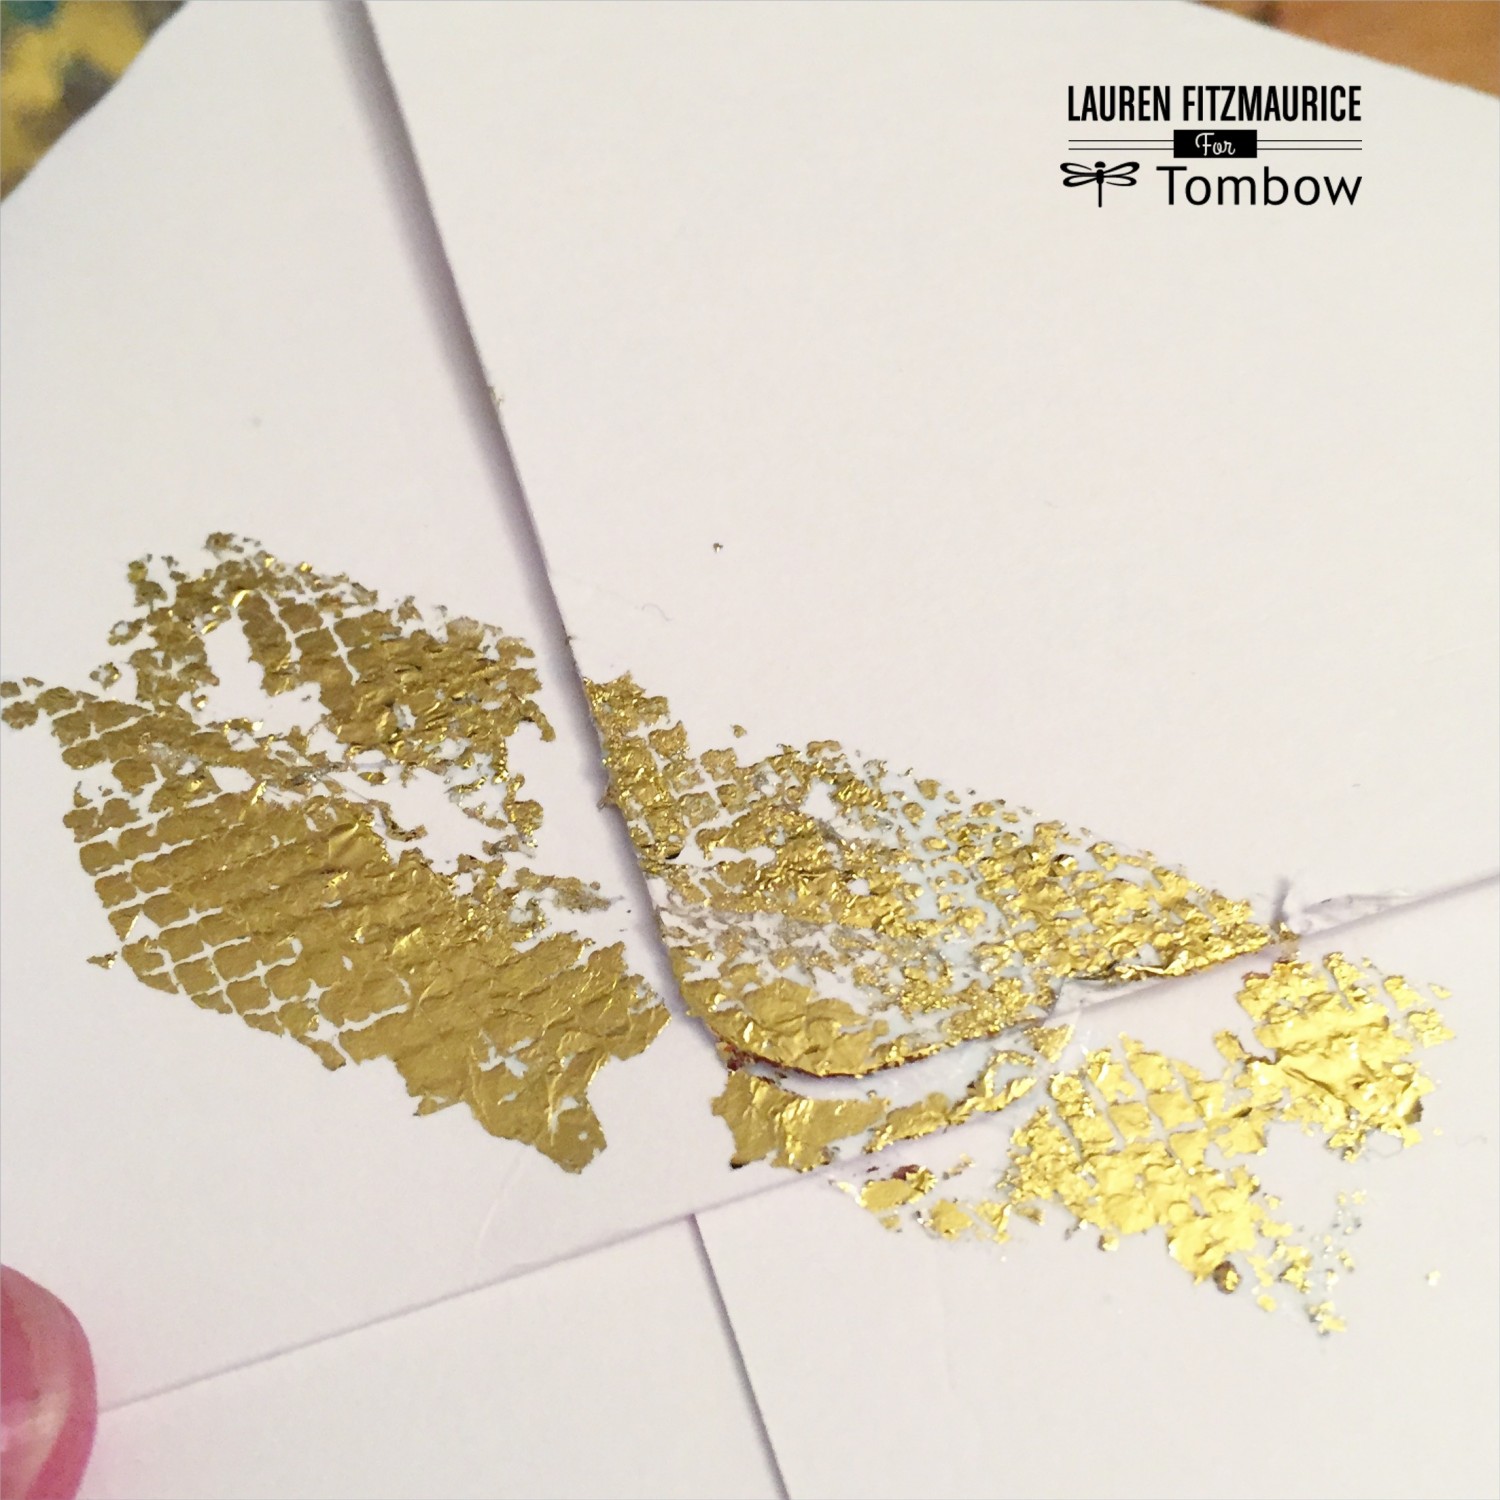 Fun foil projects to create with Tombow products!